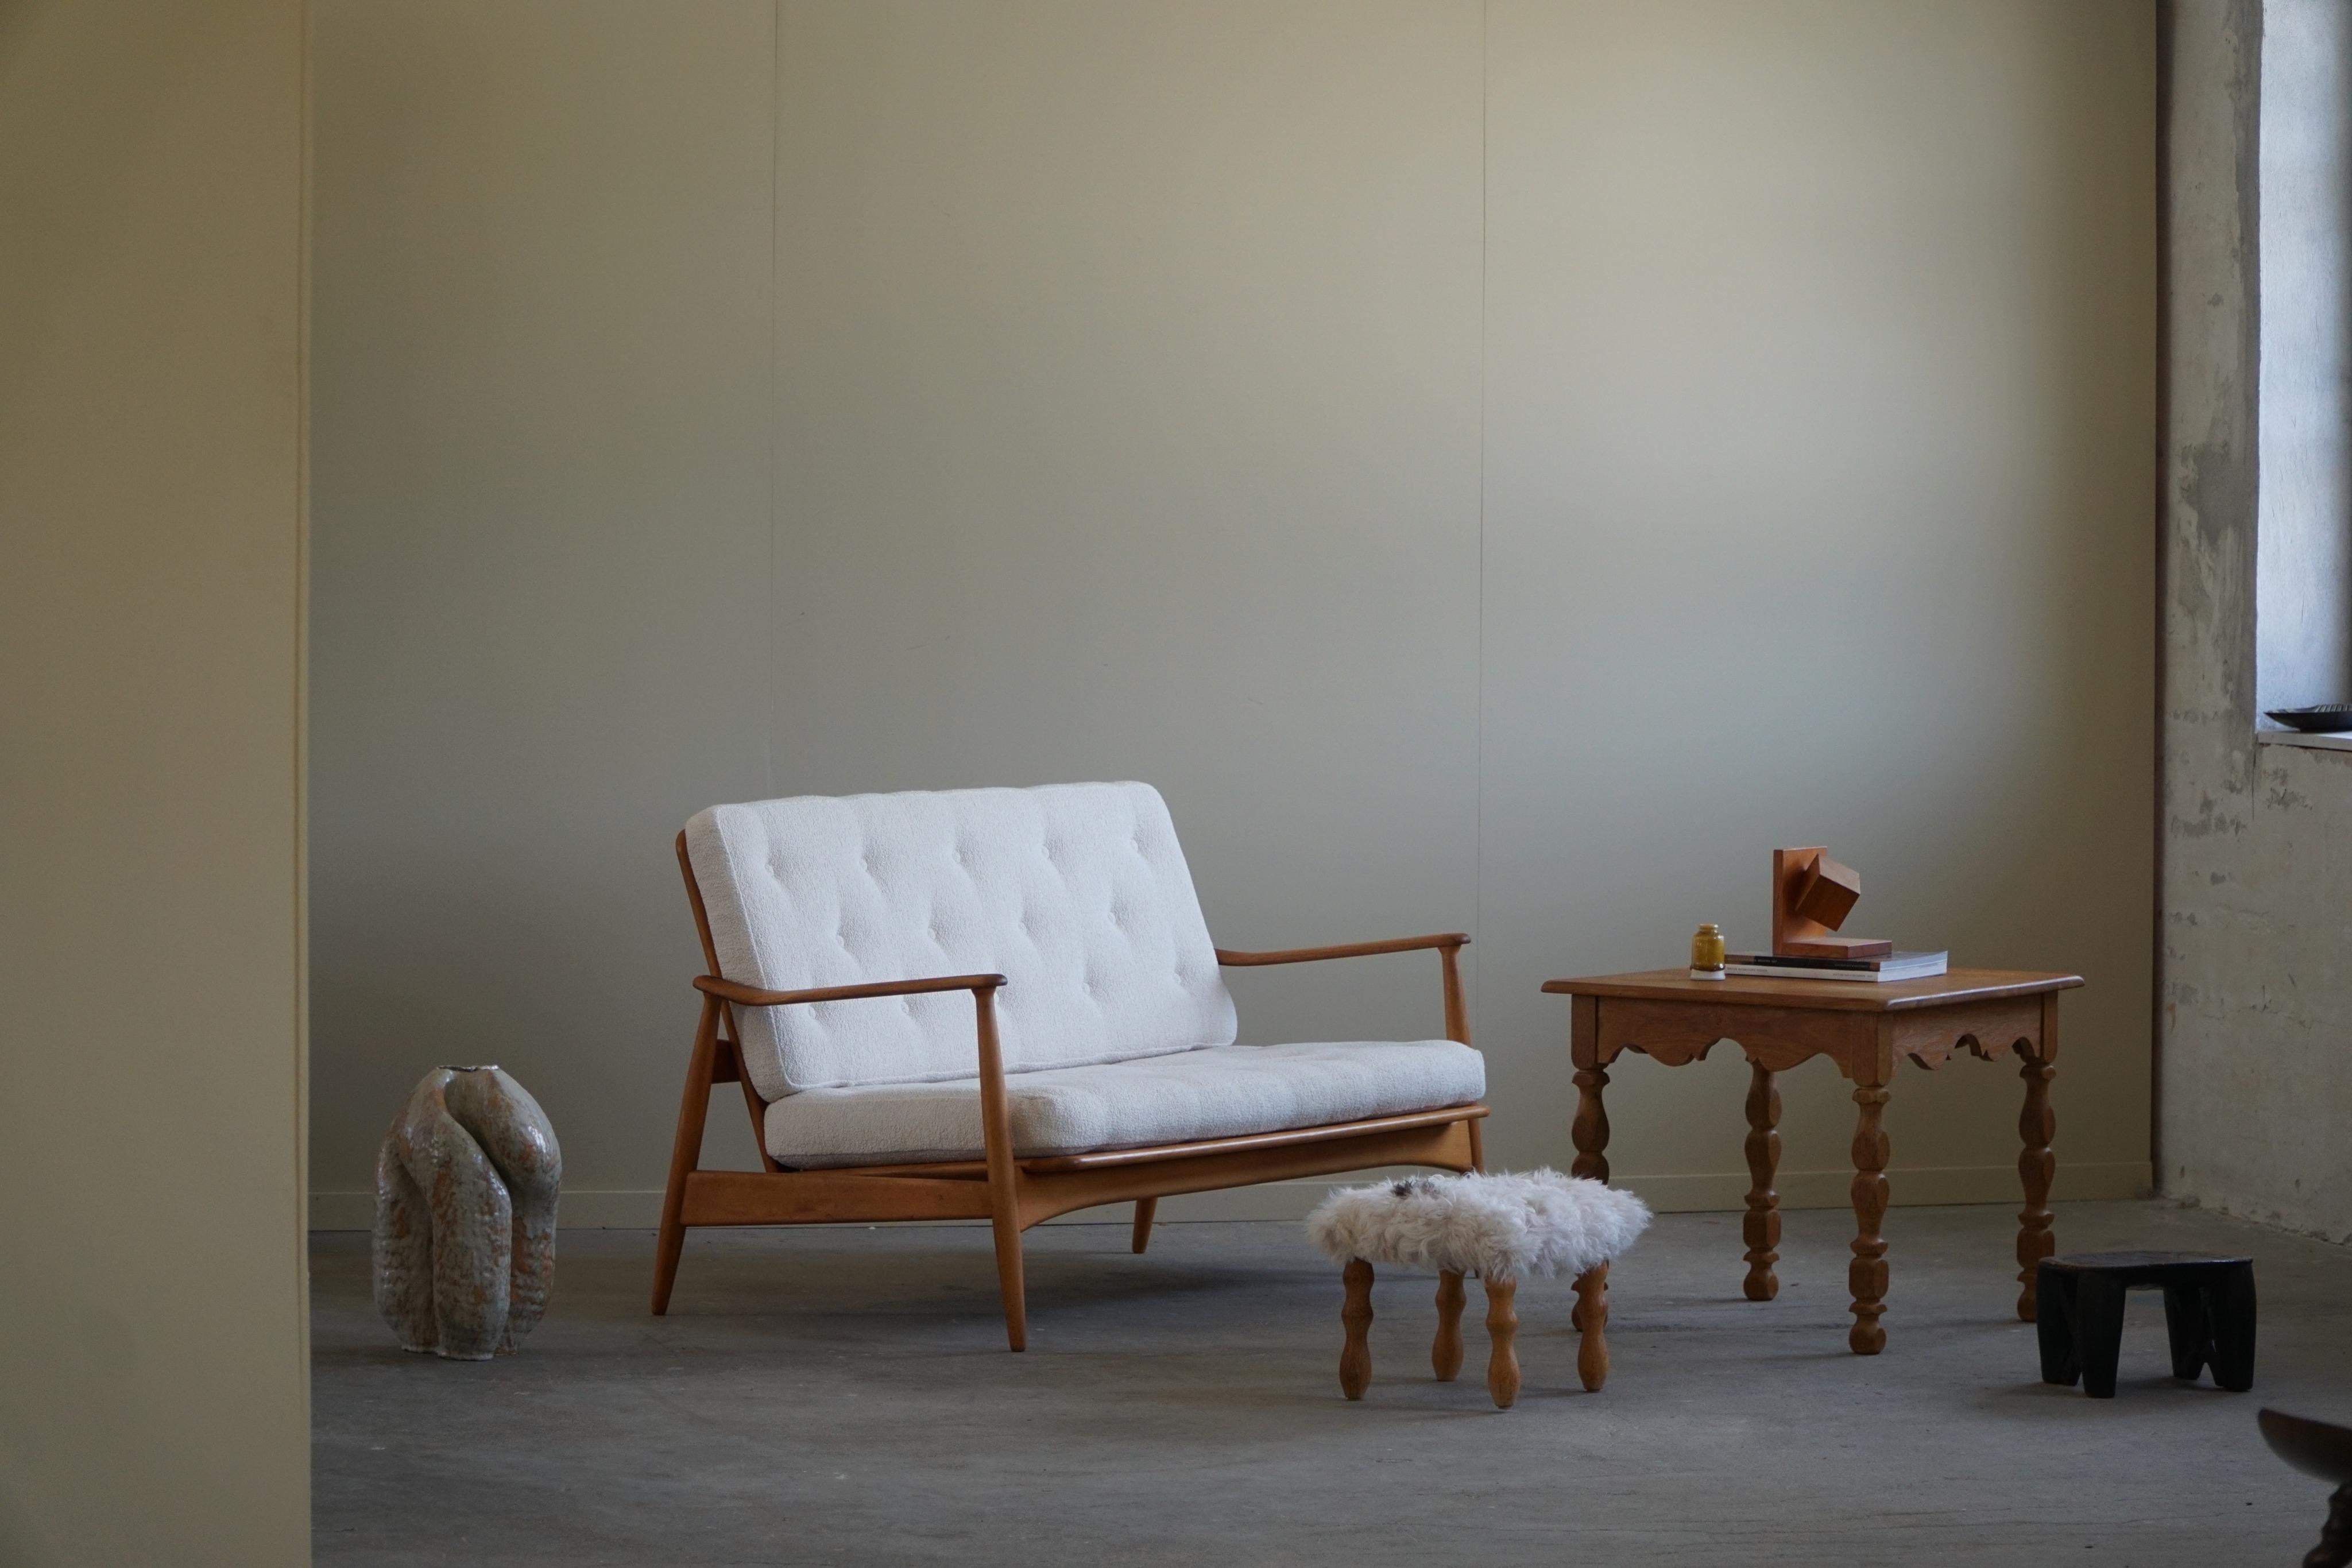 A fine example of a Danish modern 2-seater sofa in solid beech, reupholstered cushions in white bouclé. Designed by Arne Vodder for France & Daverkosen in 1950s, Denmark. 
A classic design that will complement many interior styles. A modern,